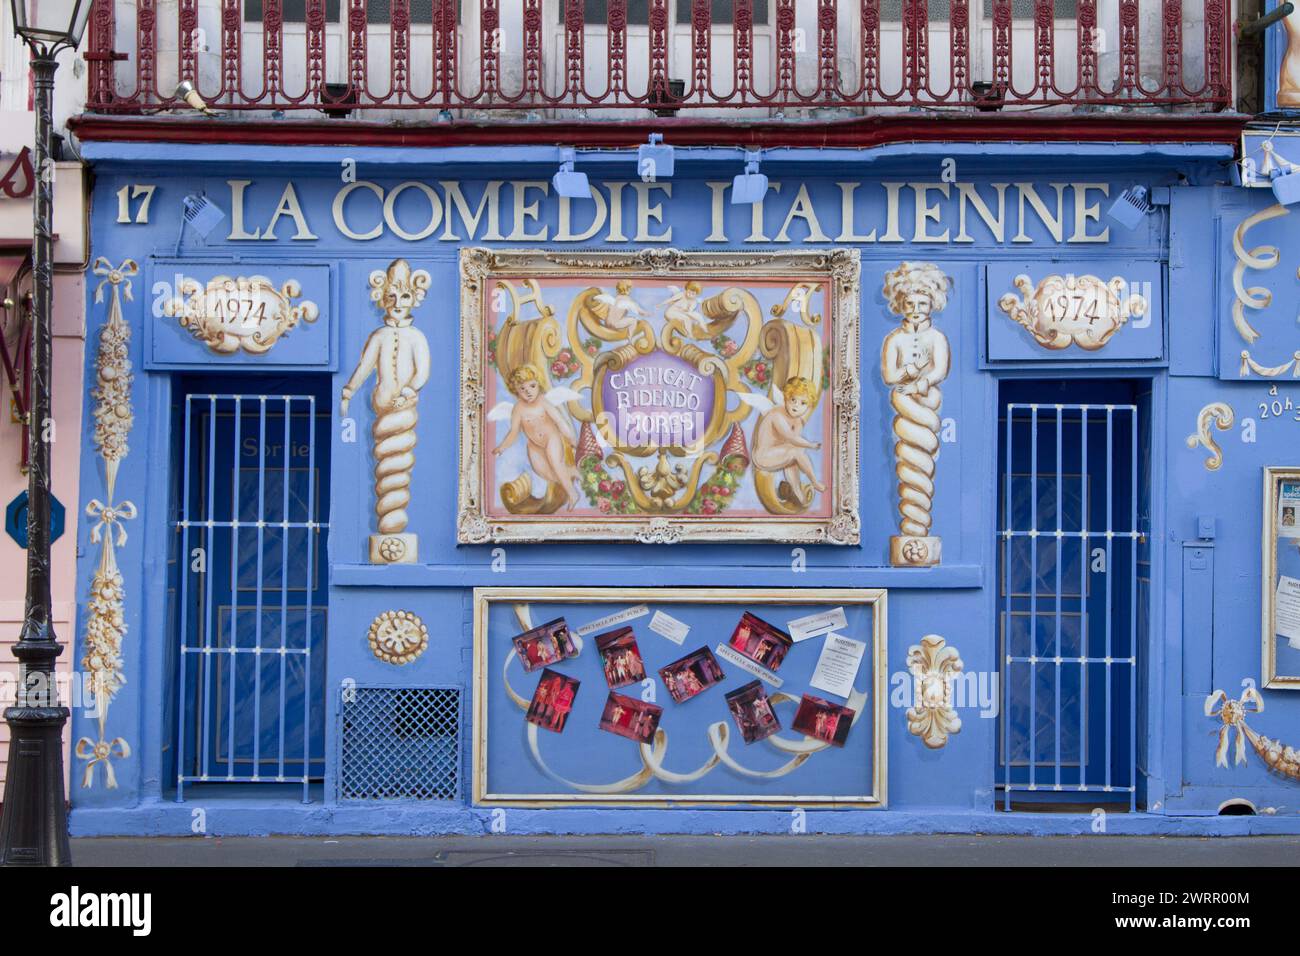 La Comédie Italienne is a theatre in the Montparnasse district of Paris, presenting Italian commedia dell'arte plays in French translation. Stock Photo